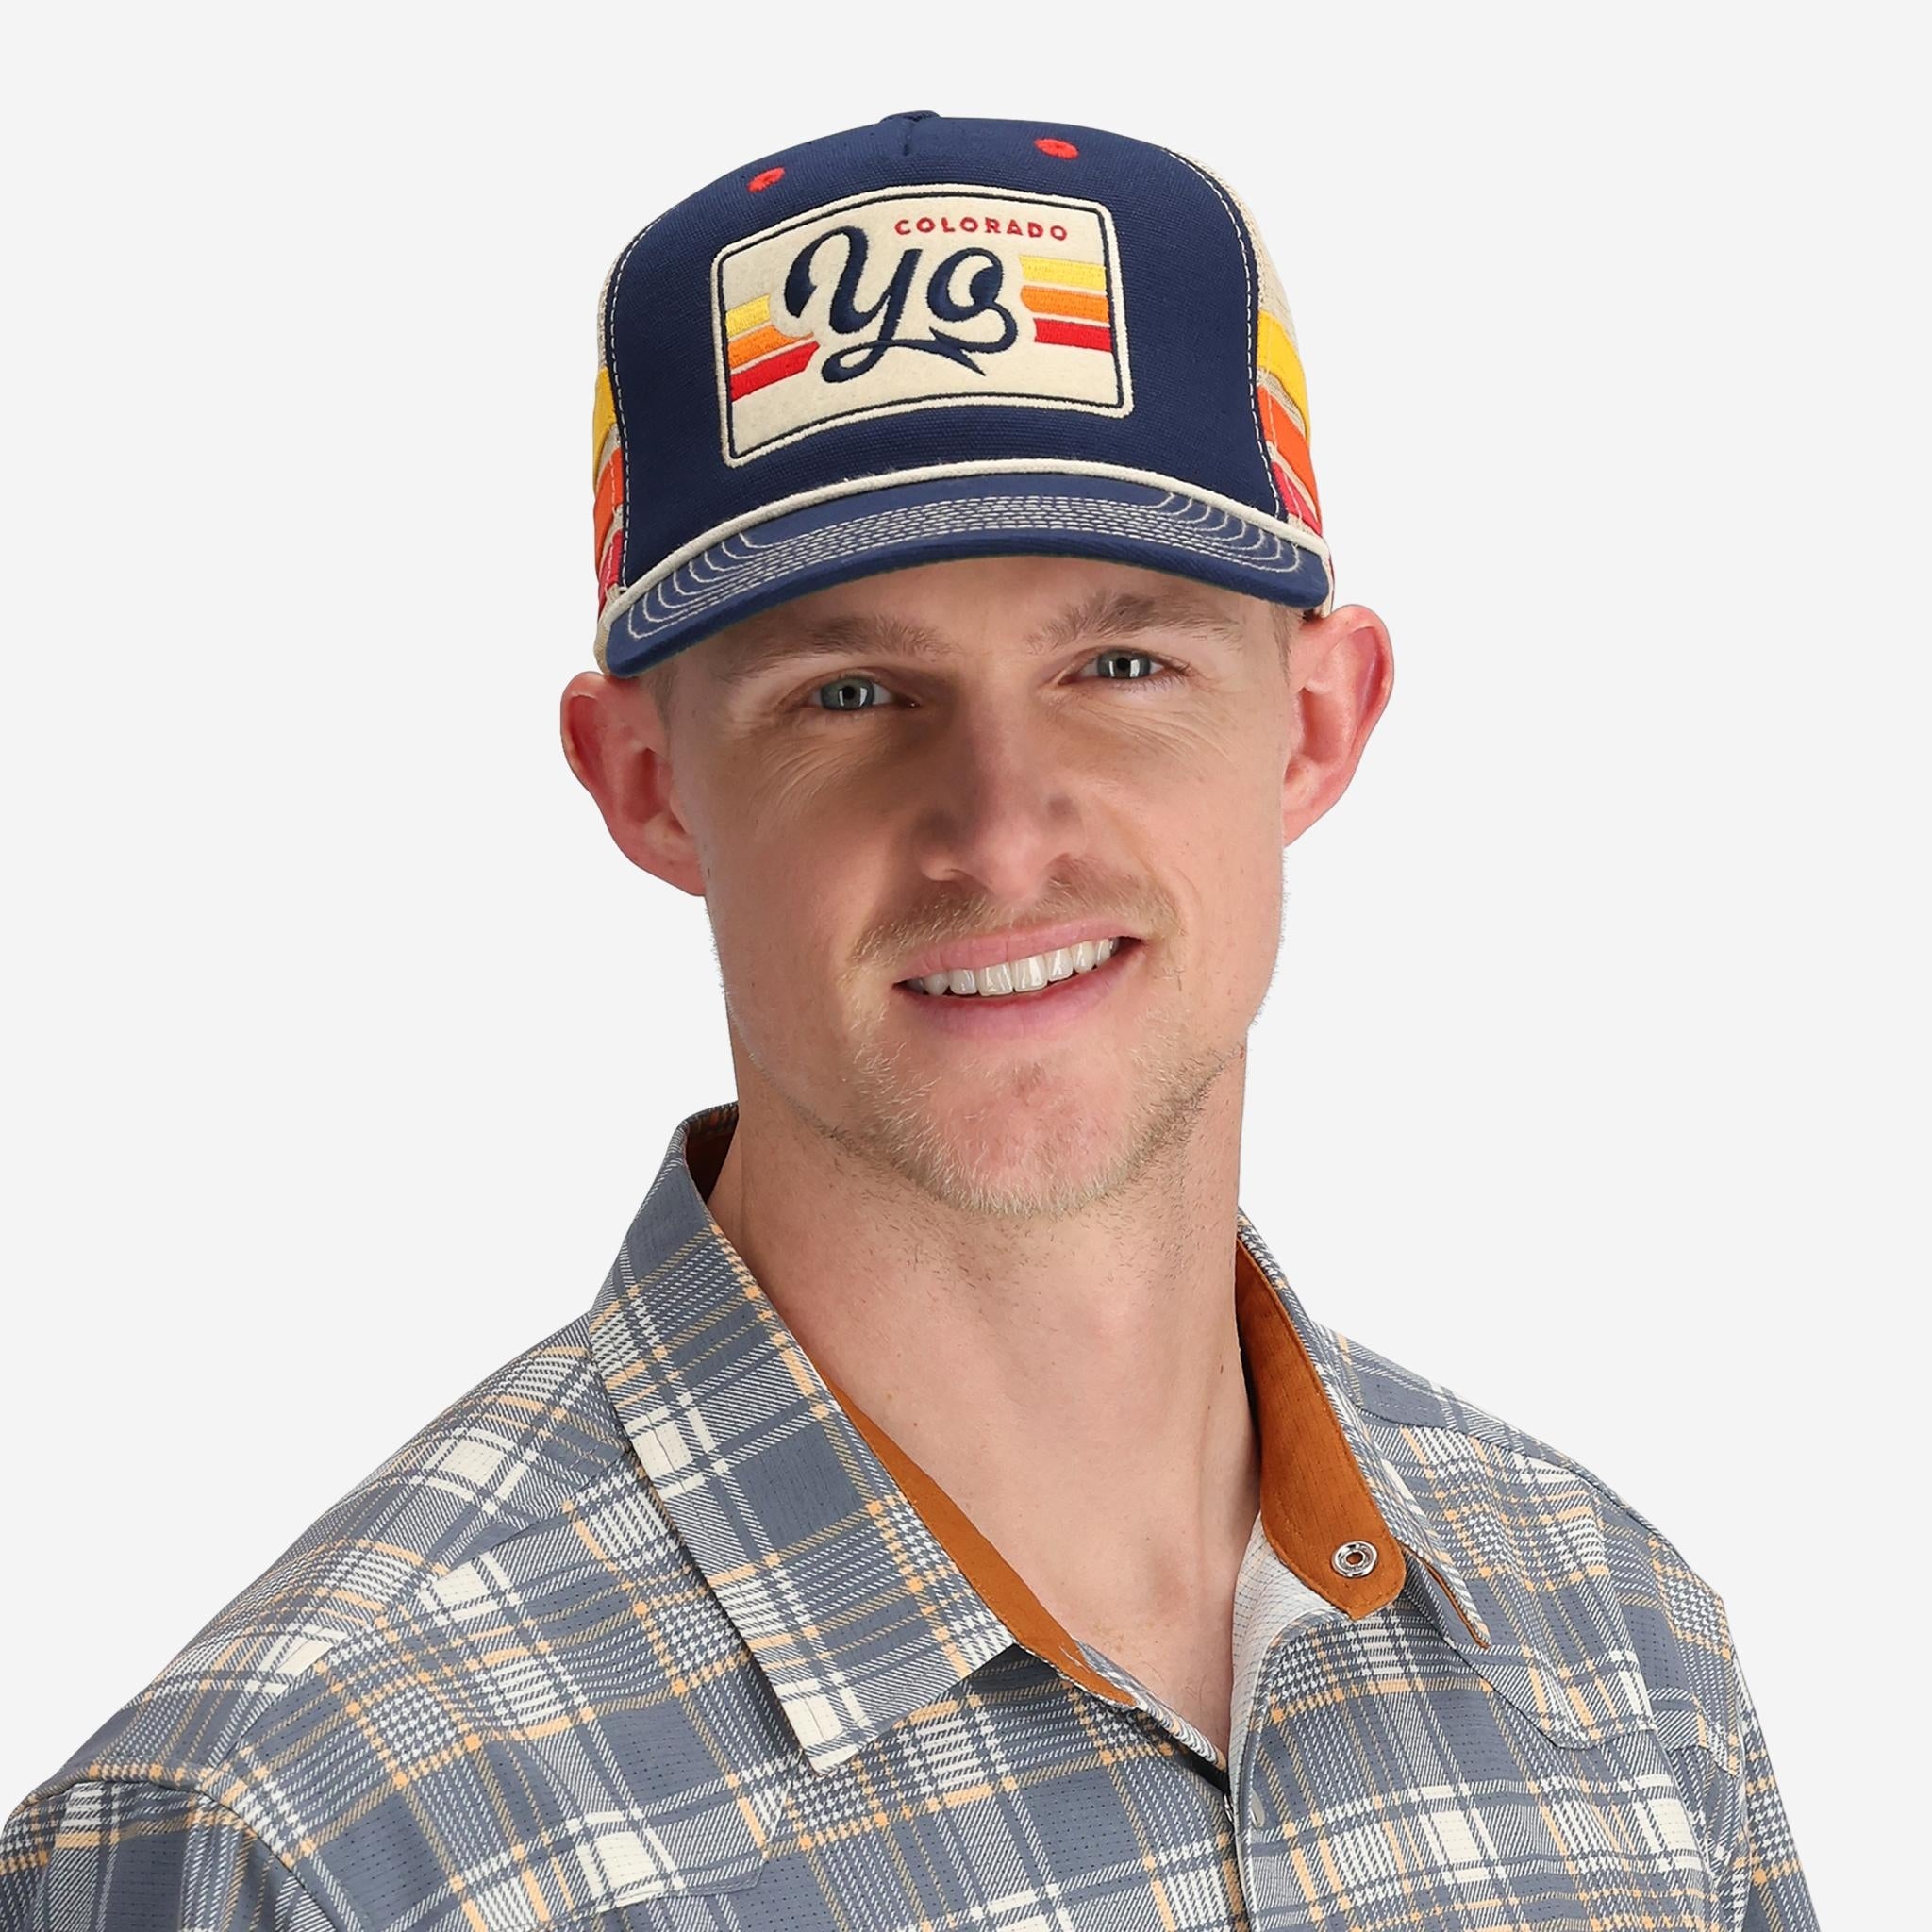 LIMITED EDITION VINTAGE PROFILE TRUCKER HATS